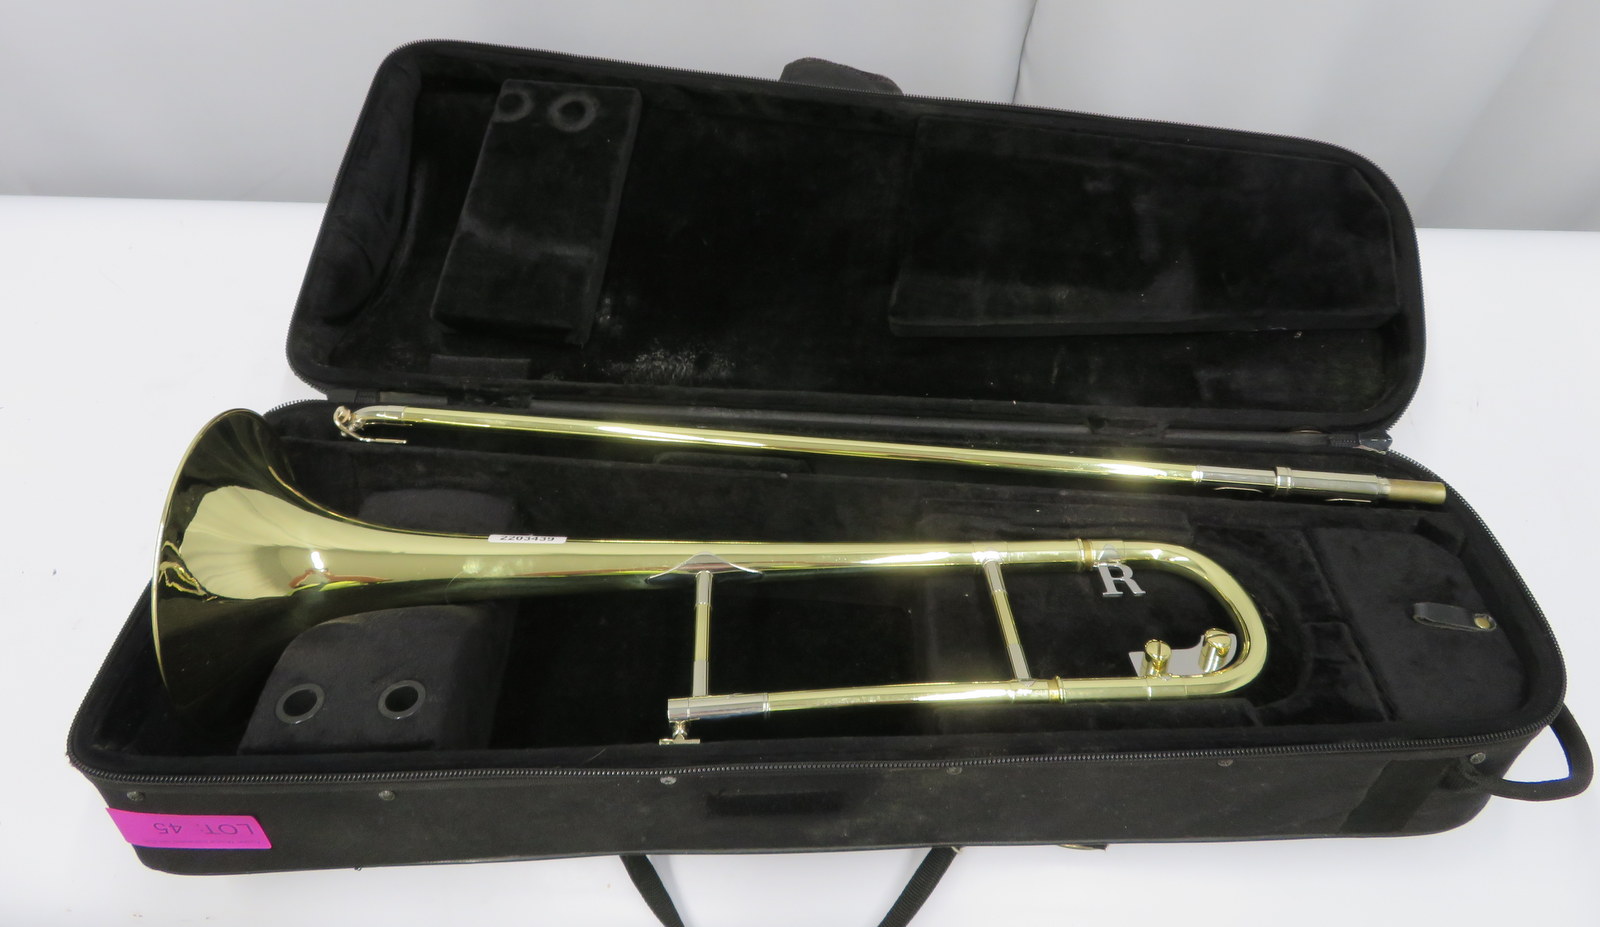 Rath R4 trombone with case. Serial number: R4158.